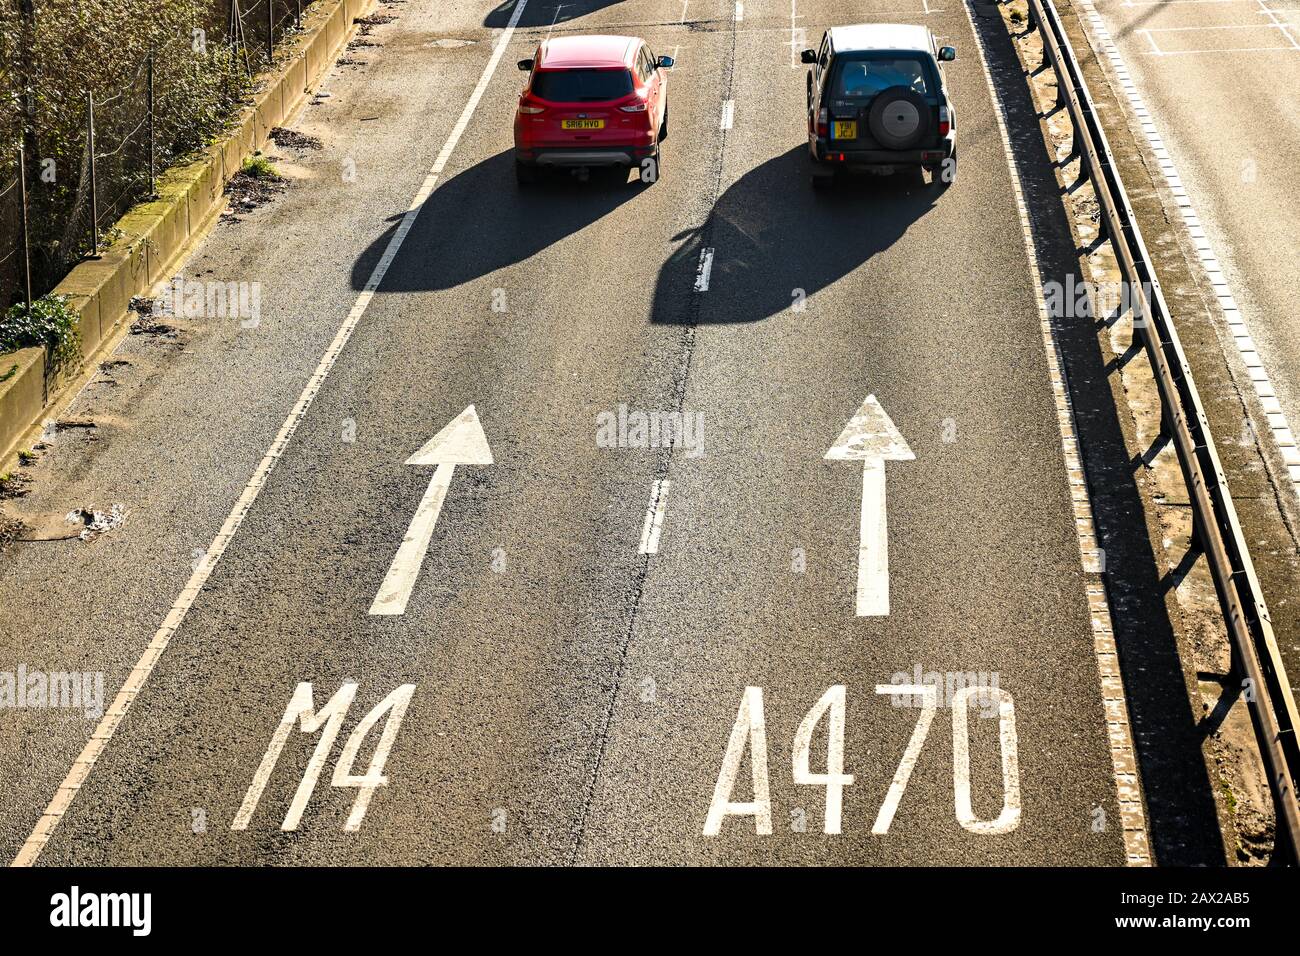 TAFFS WELL, NEAR CARDIFF, WALES - JUNE 2018: Aerial view of trafic and lane markings on the A470 trunk road at Taffs Well heading towards Cardiff. Stock Photo